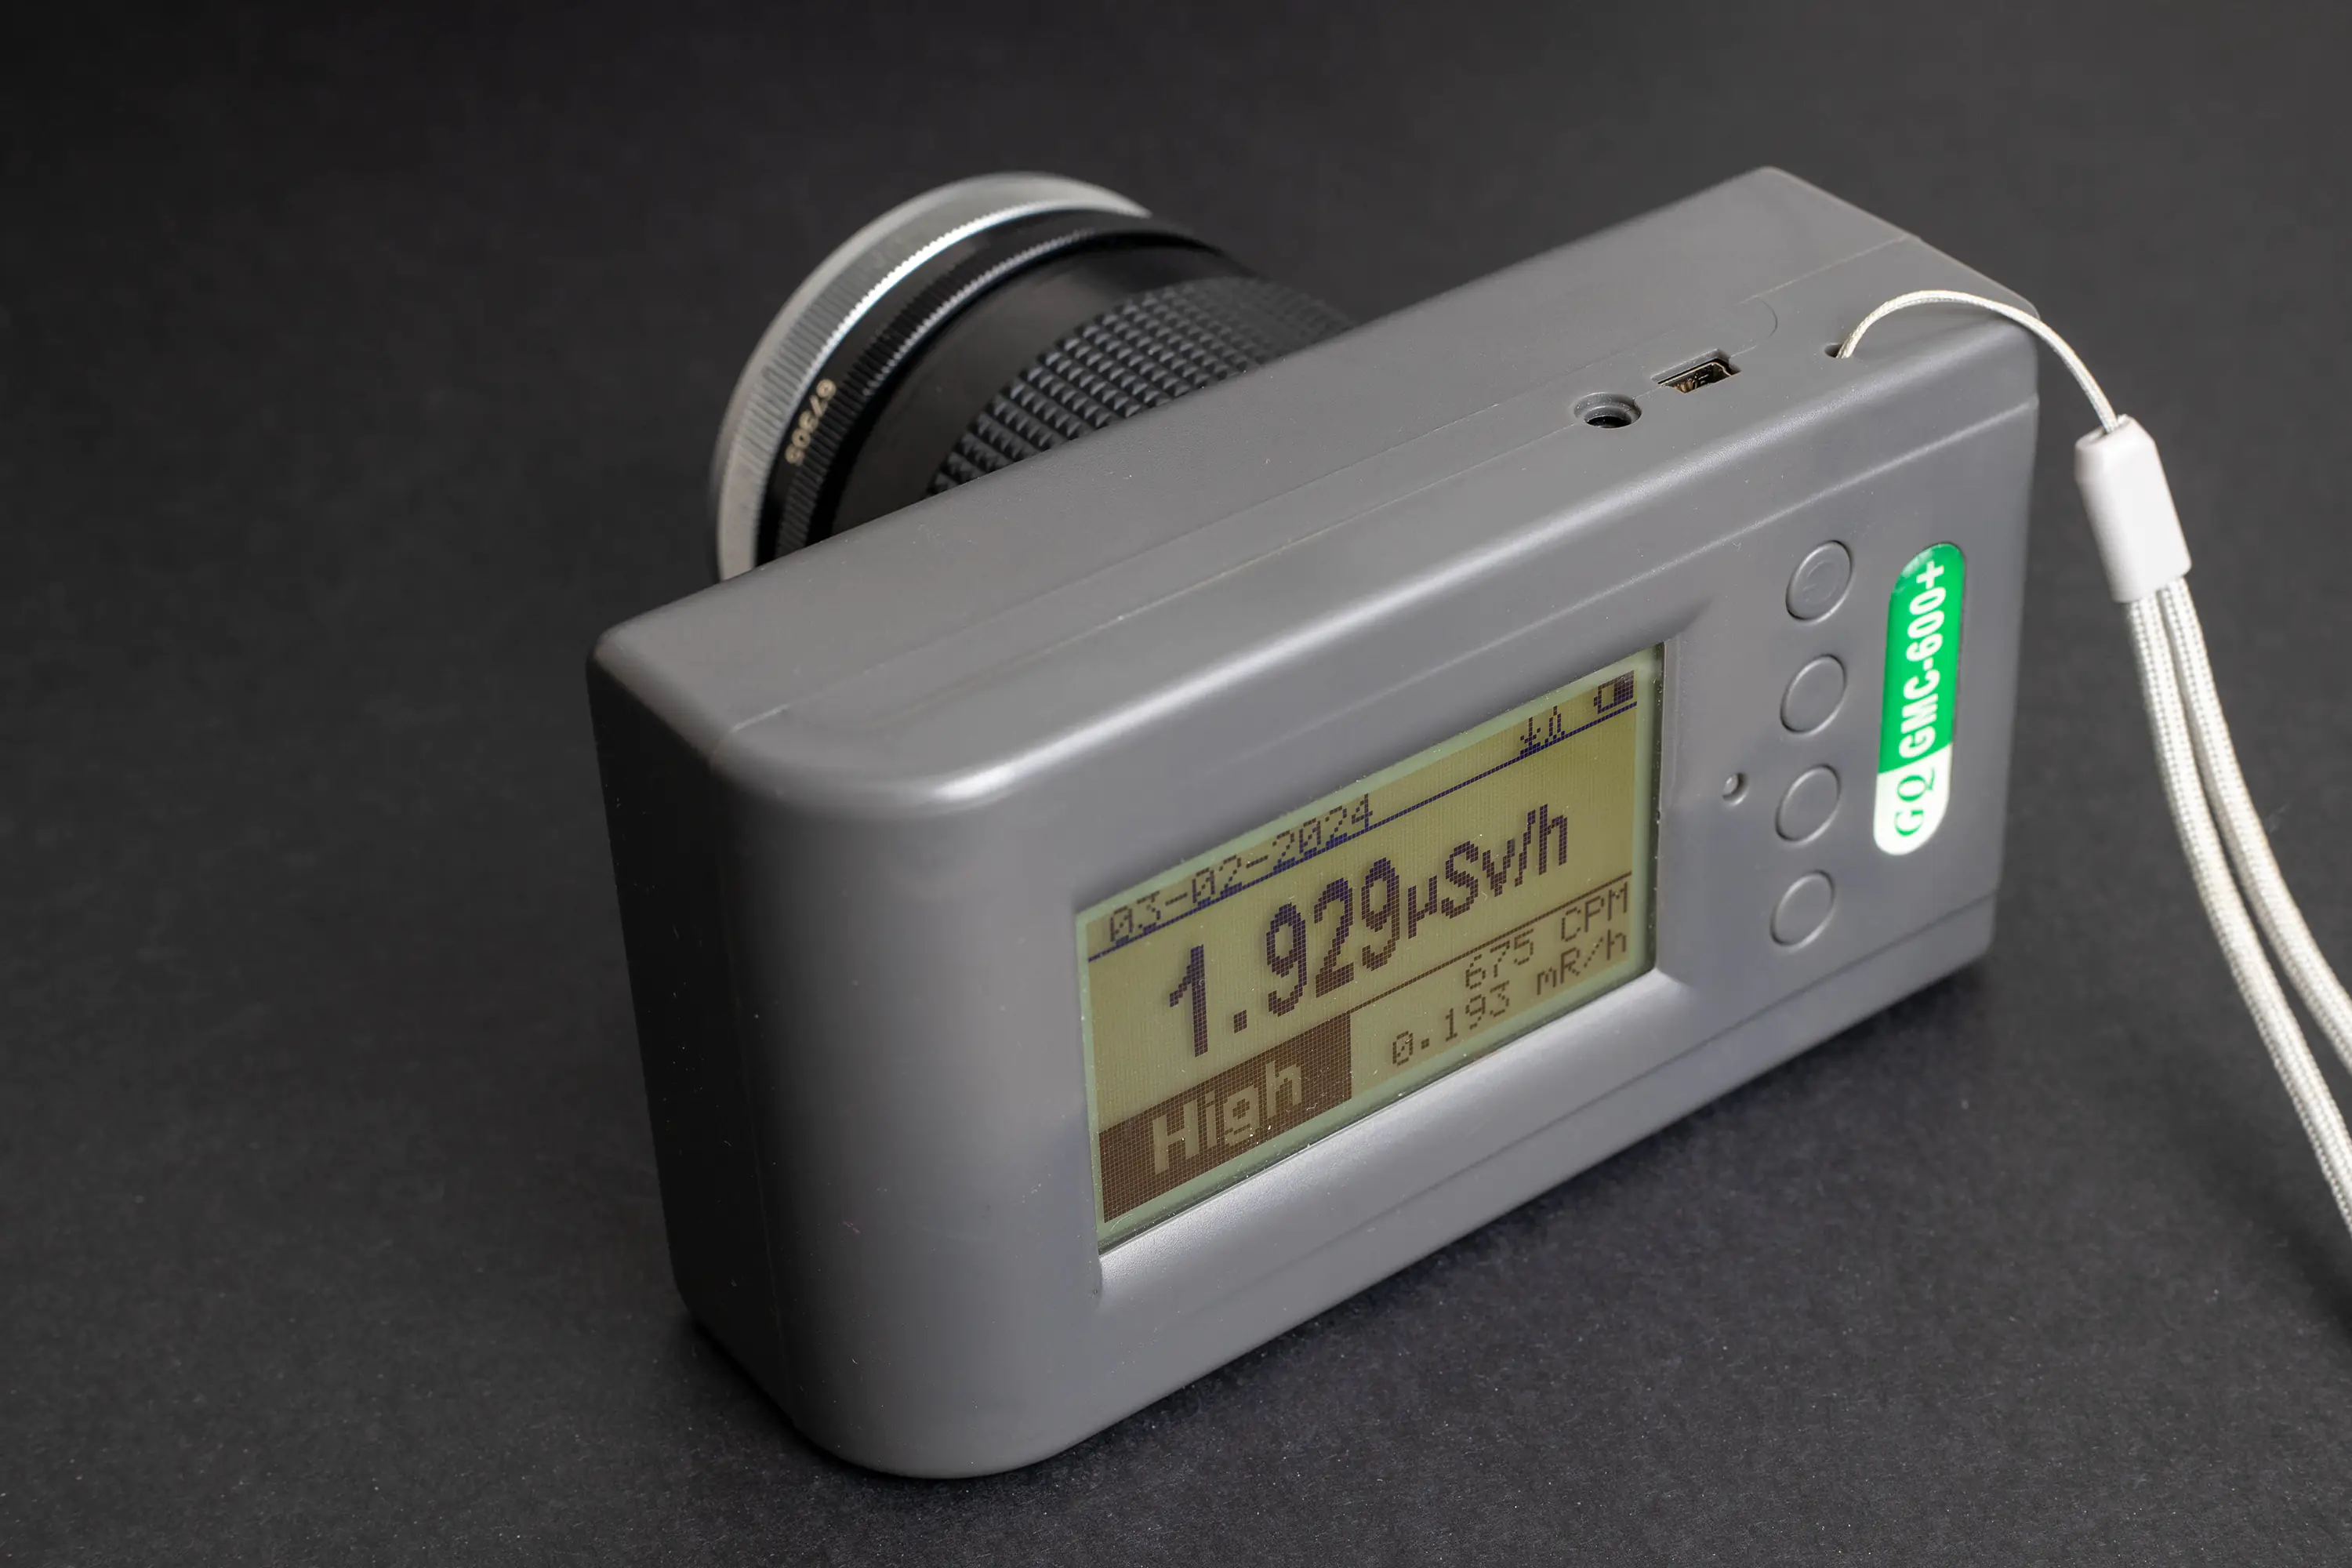 Geiger counter is showing 1.9 uSv/h at the front element of Canon FD 35mm f2